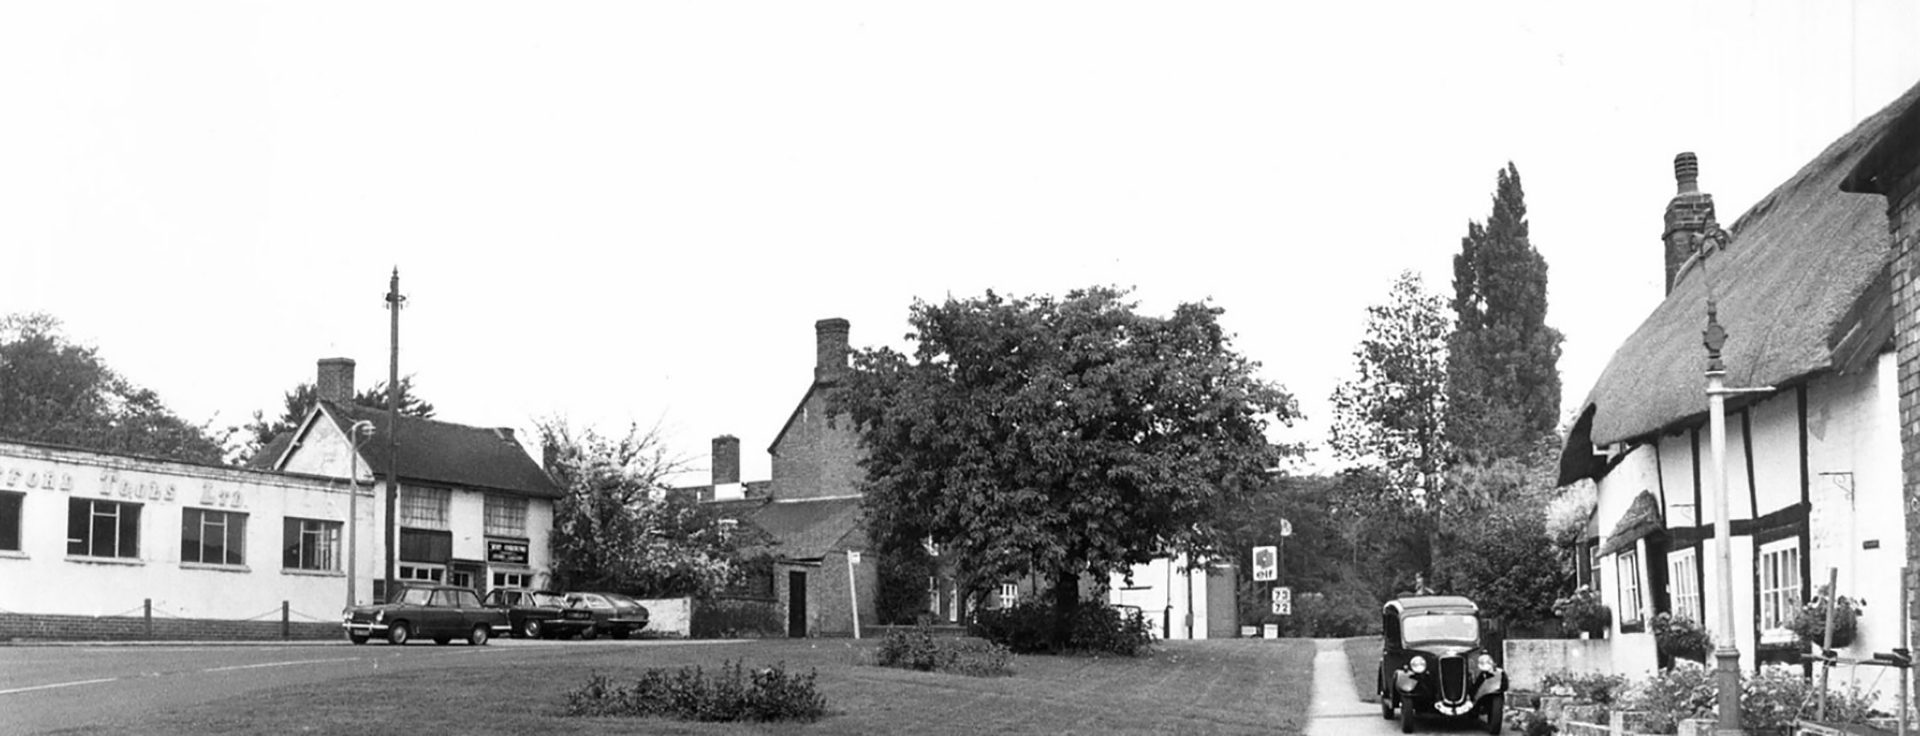 Coombe-Hall-in-1930